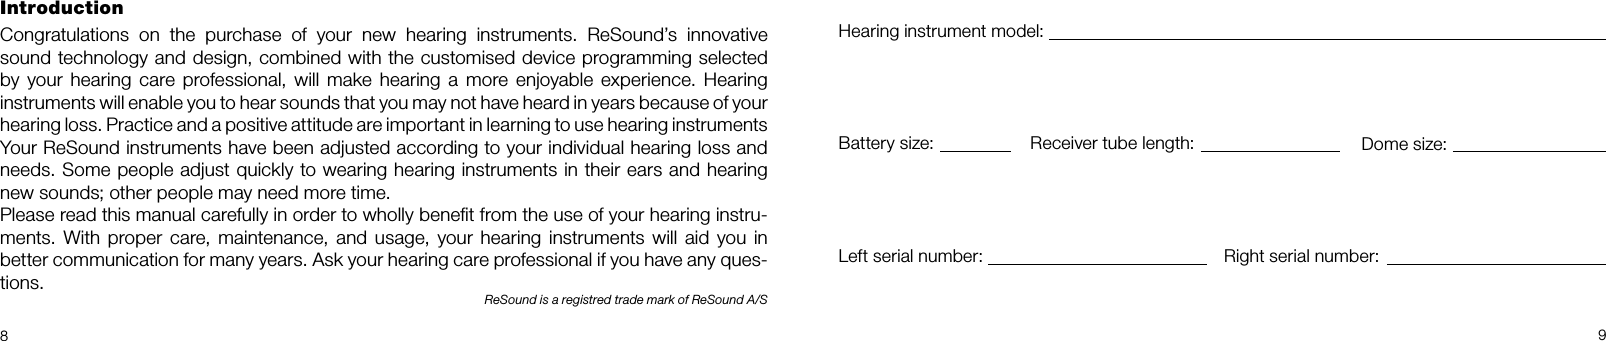 89IntroductionCongratulations on the purchase of your new hearing instruments. ReSound’s innovative  sound technology and design, combined with the customised device programming selected  by your hearing care professional, will make hearing a more enjoyable experience. Hearing  instruments will enable you to hear sounds that you may not have heard in years because of your  hearing loss. Practice and a positive attitude are important in learning to use hearing instruments   Your ReSound instruments have been adjusted according to your individual hearing loss and  needs. Some people adjust quickly to wearing hearing instruments in their ears and hearing new sounds; other people may need more time.Please read this manual carefully in order to wholly beneﬁt from the use of your hearing instru-ments. With proper care, maintenance, and usage, your hearing instruments will aid you in better communication for many years. Ask your hearing care professional if you have any ques-tions.ReSound is a registred trade mark of ReSound A/SHearing instrument model:Battery size: Receiver tube length: Dome size:Left serial number: Right serial number: